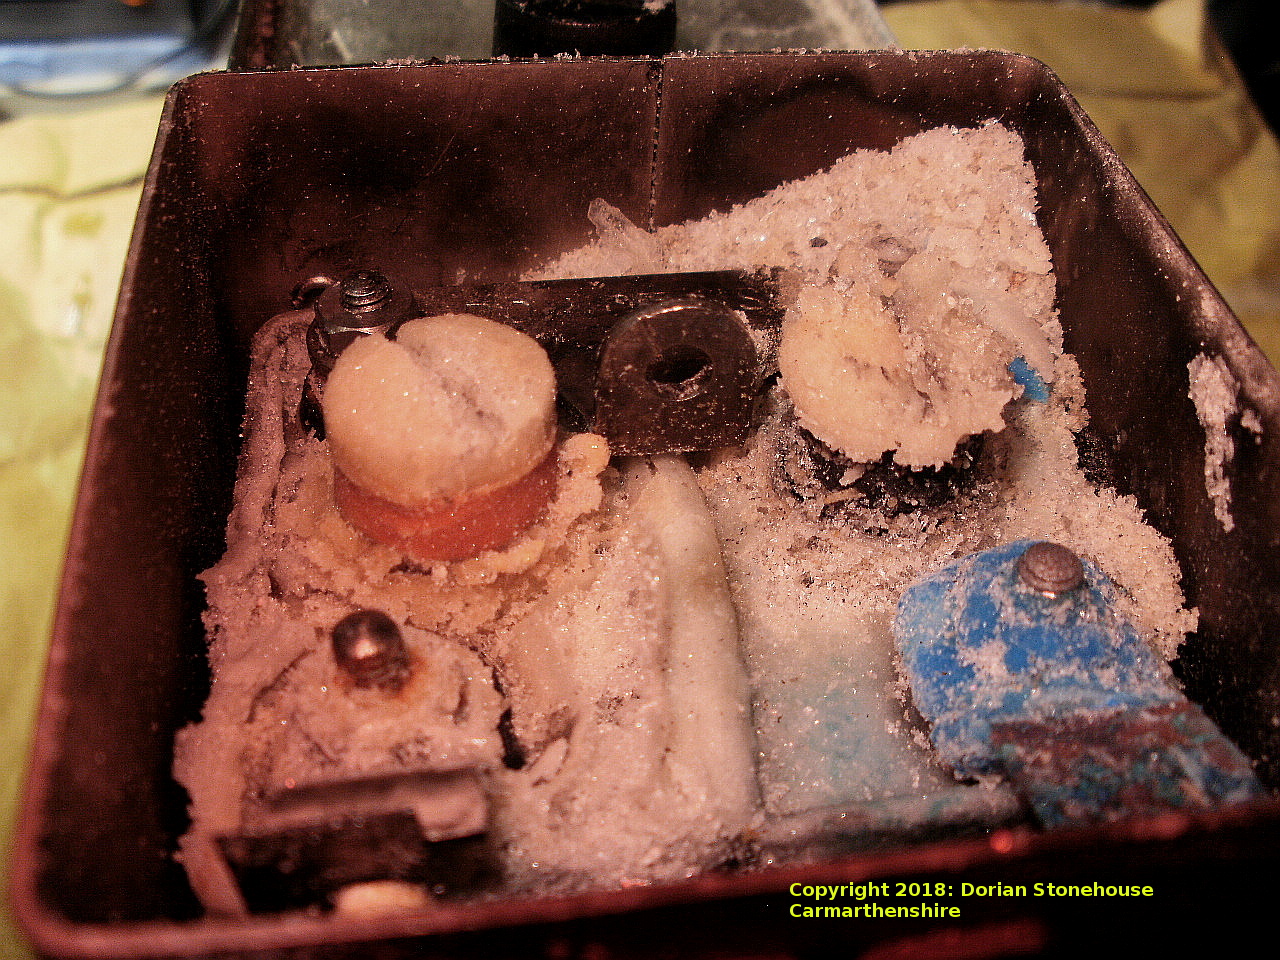 The NIFE battery was covered in crystals of potassium hydroxide